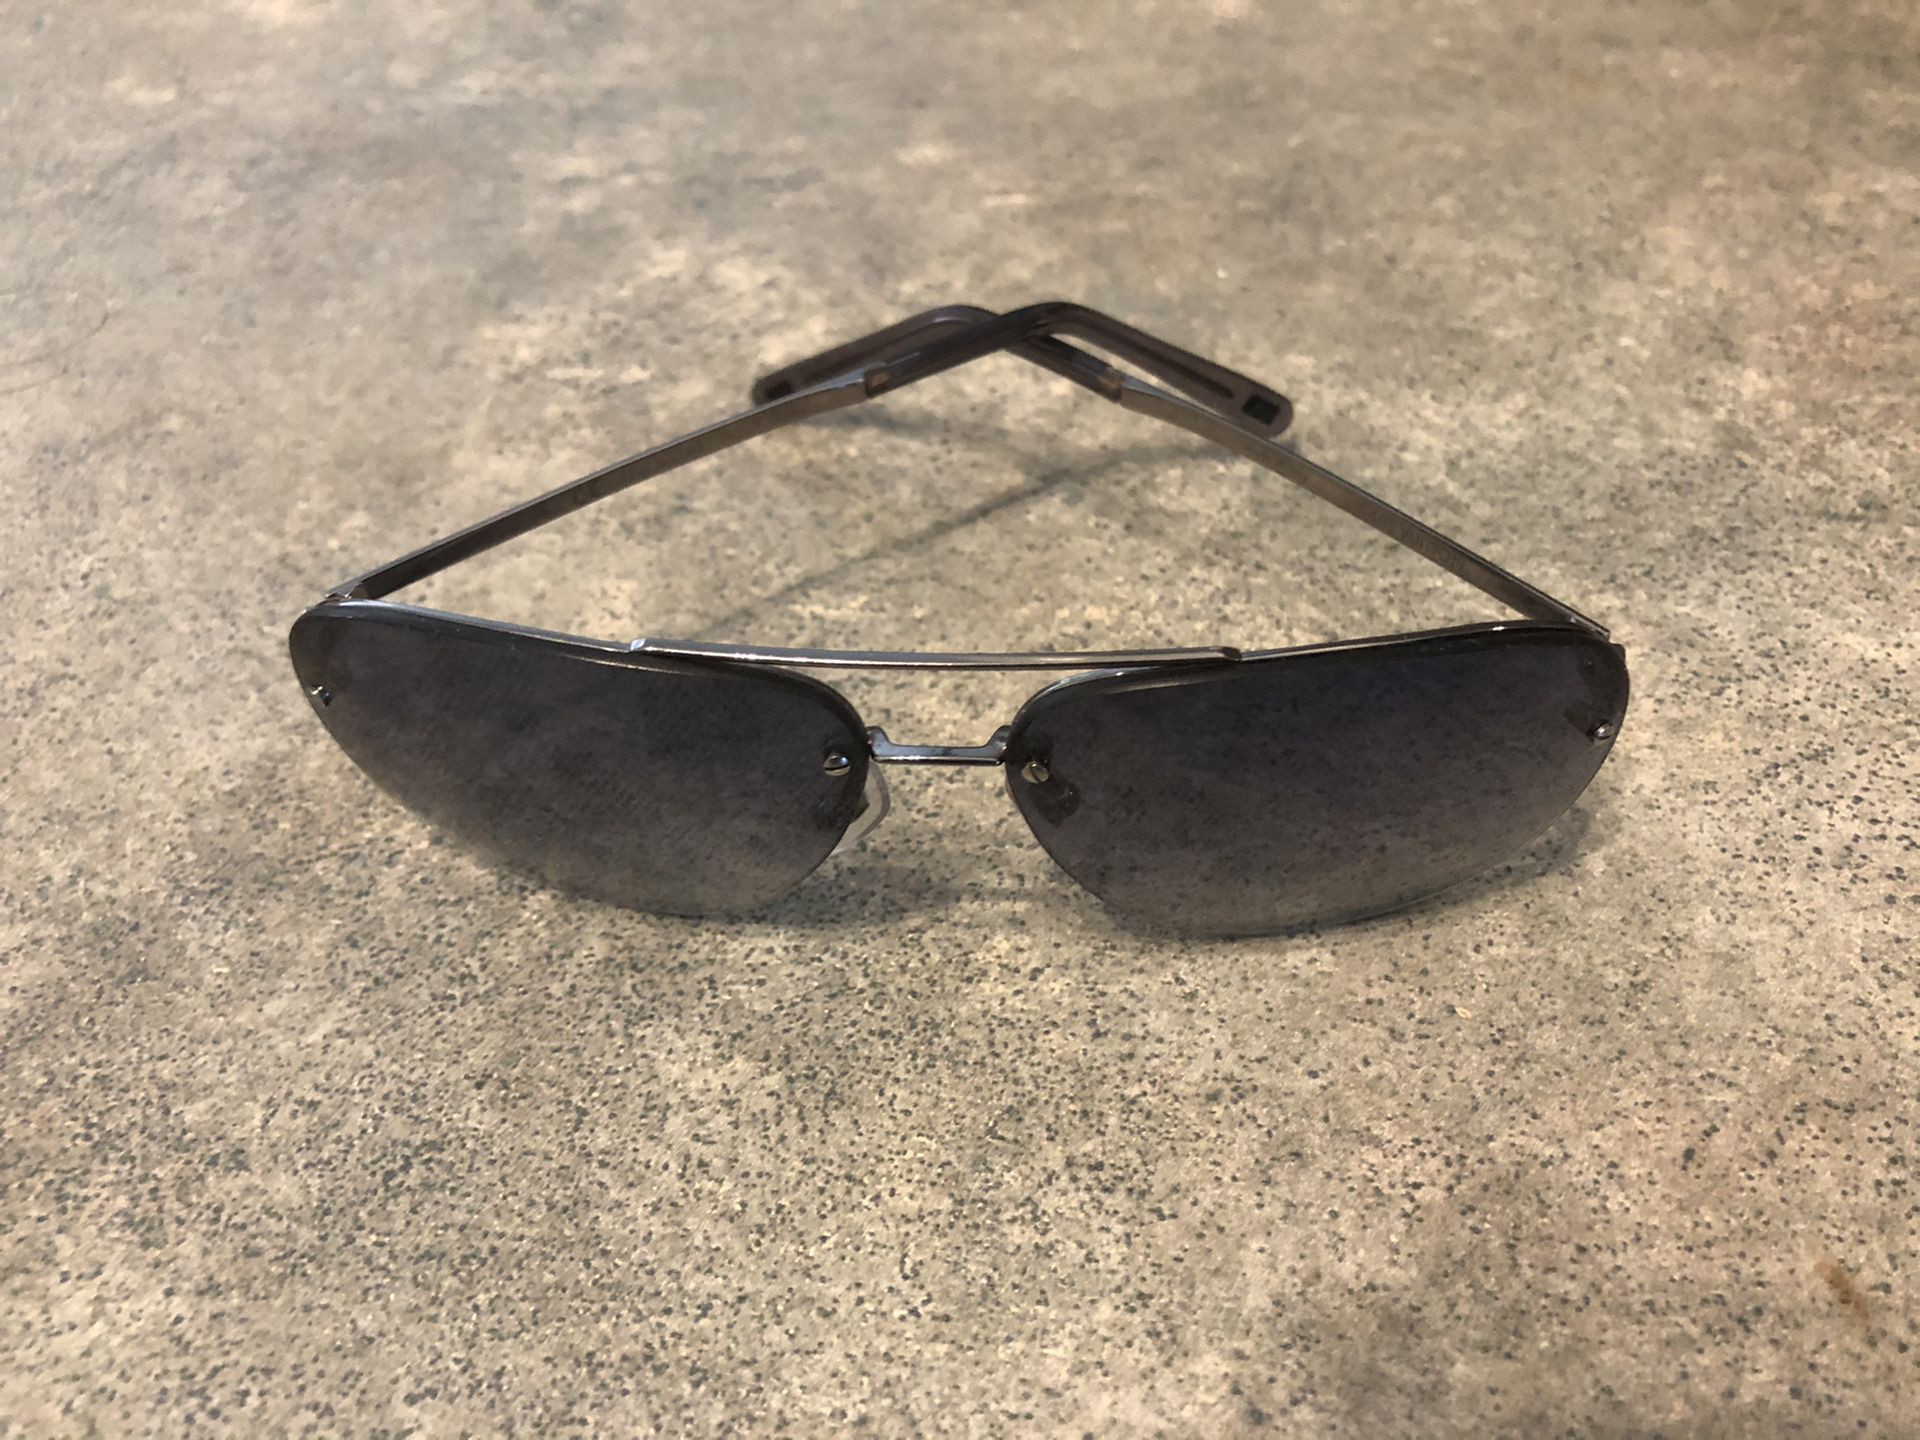 Authentic Men’s Louis Vuitton (used)aviator sunglasses.. see photos.. asking $250 OBO / eBay has them listed for $400 used.